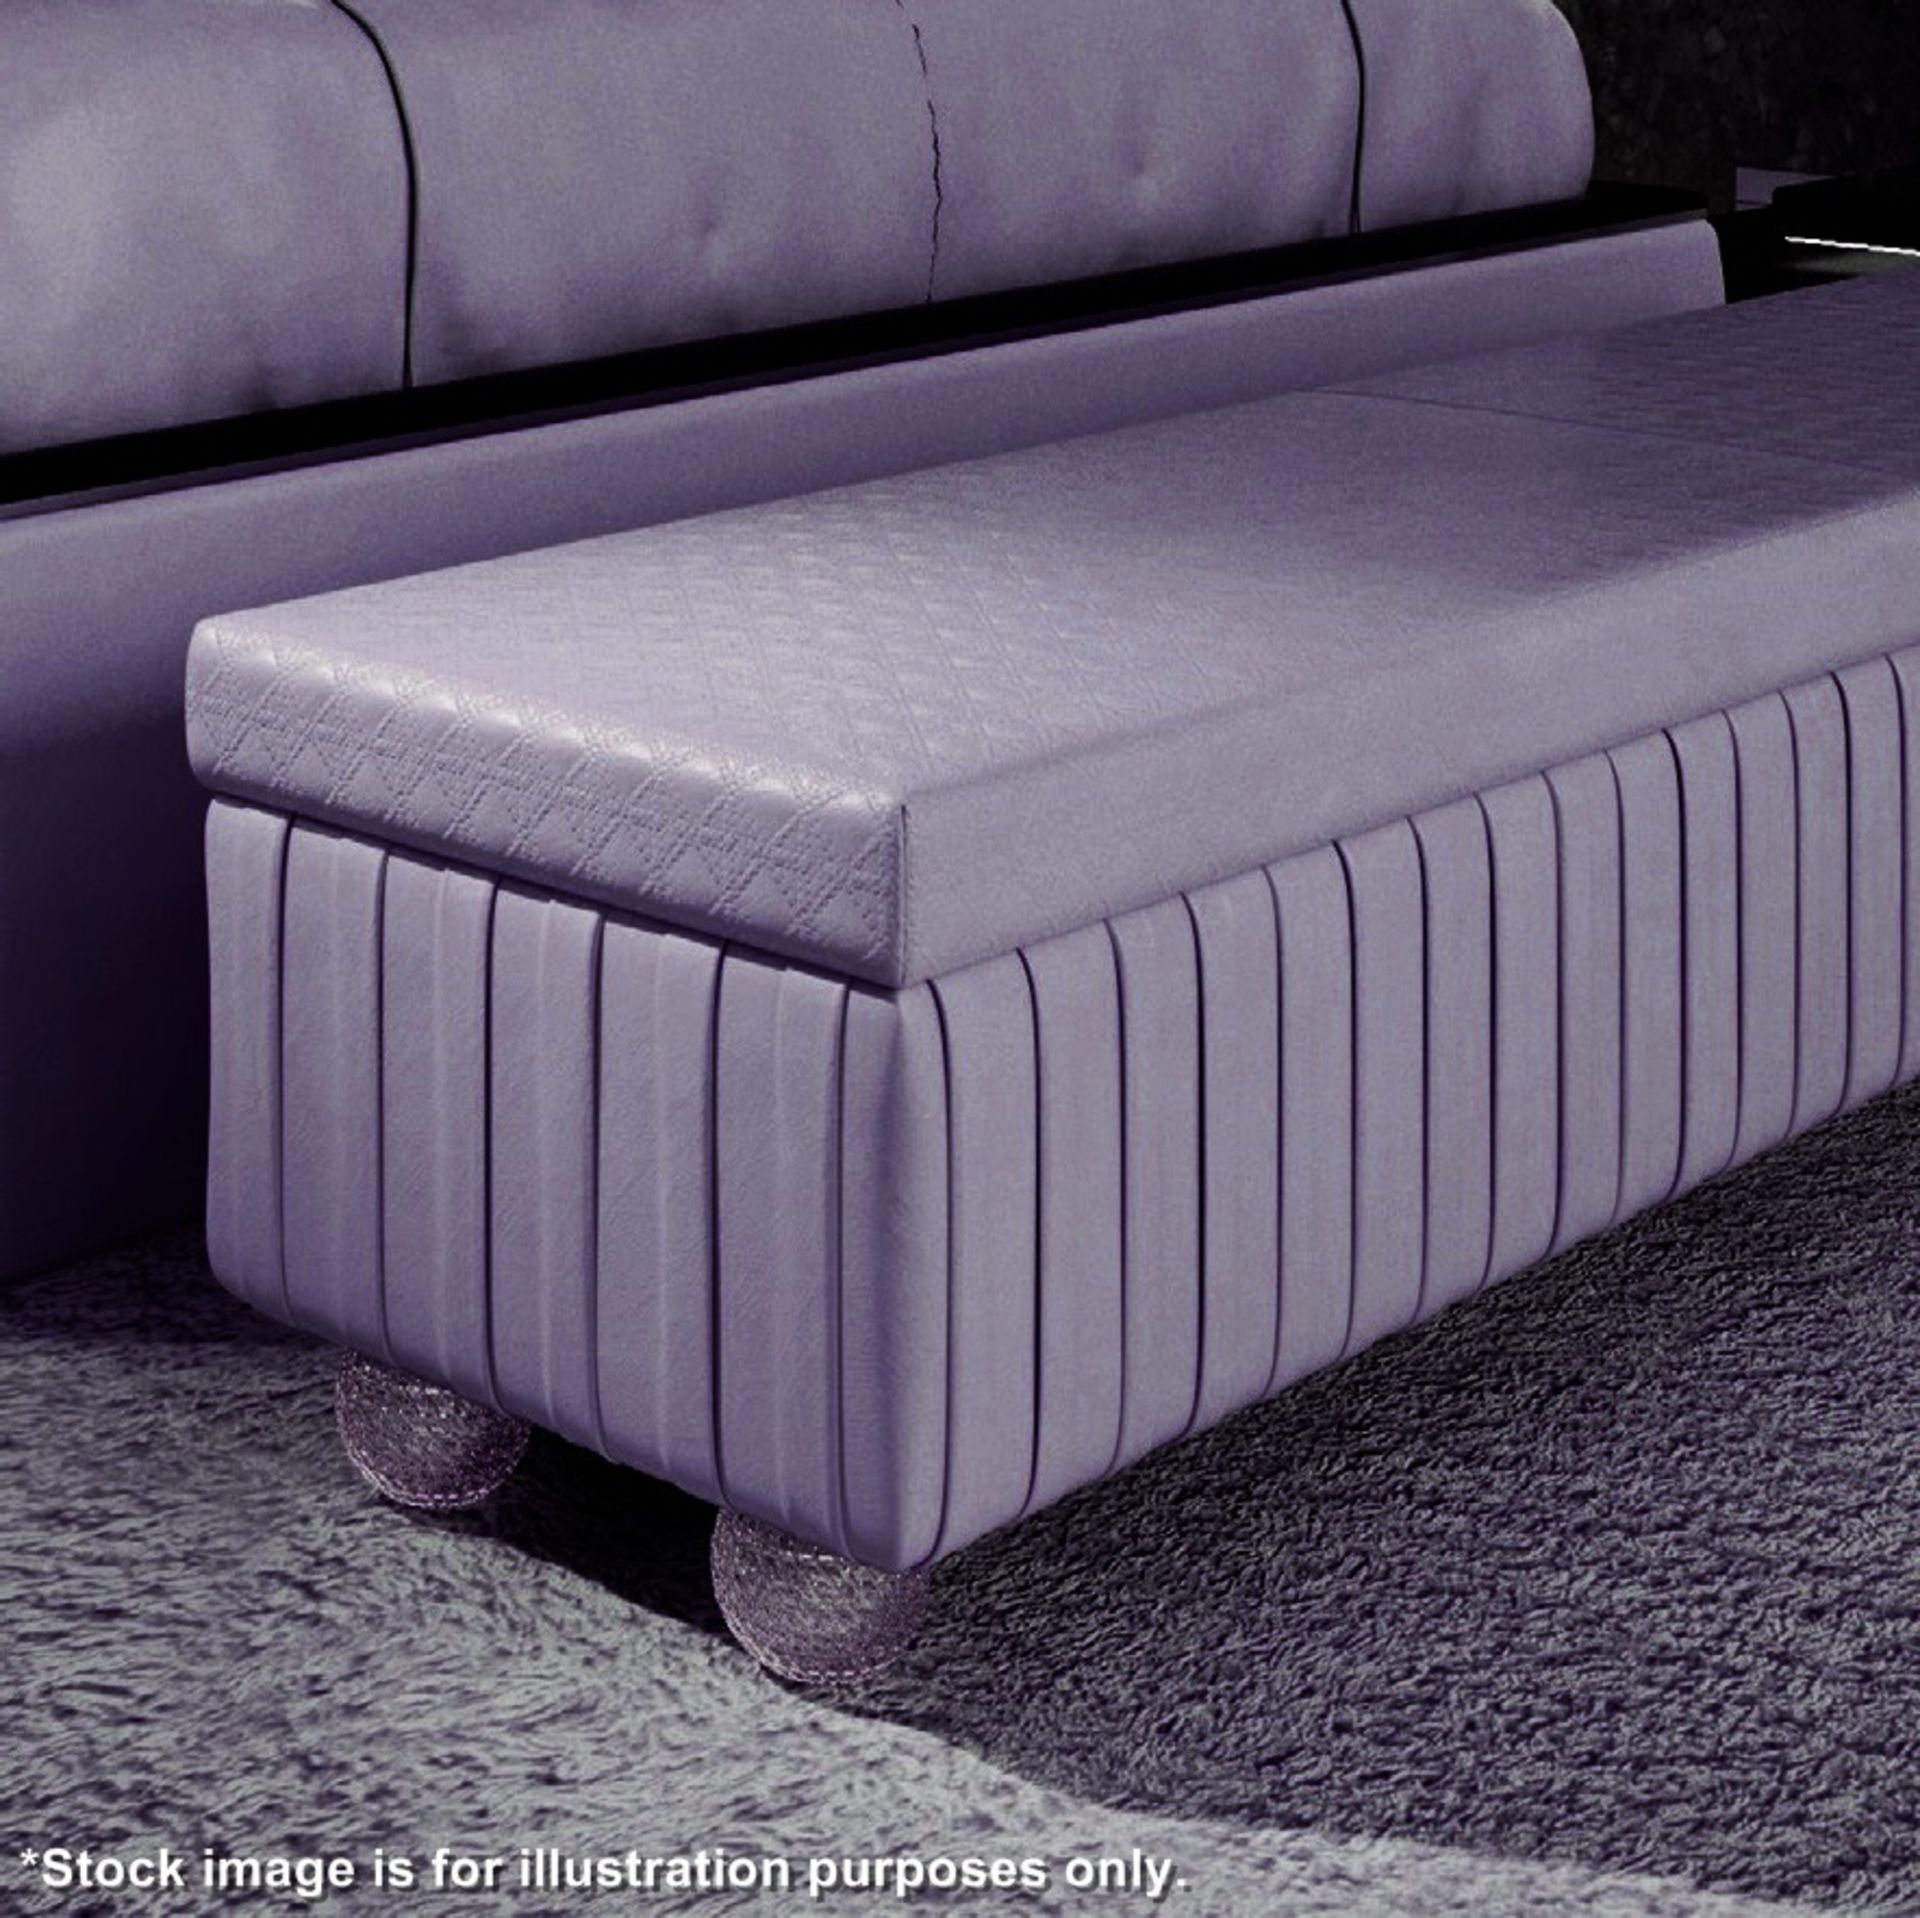 1 x REFLEX 'Plisse' Pleated Ottoman / Bedroom Bench In Plum With 'Illuminated' Spherical Glass Feet